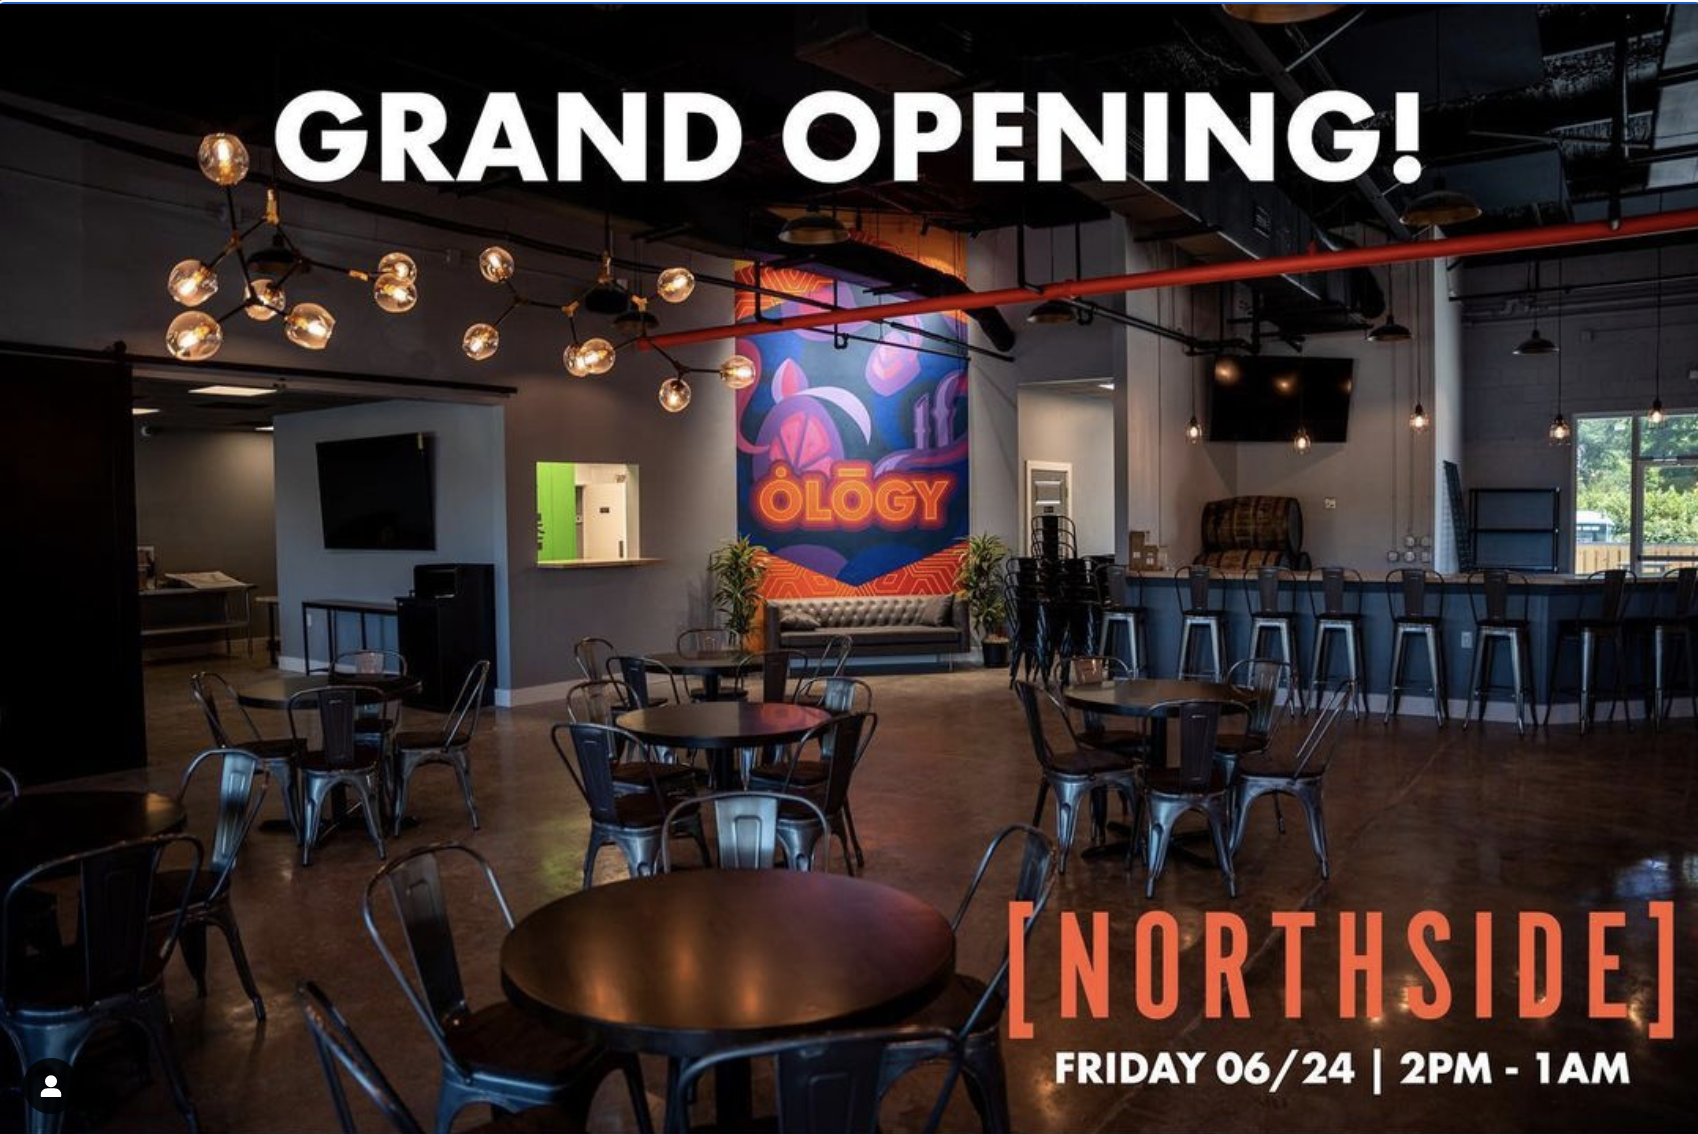 Ology Brewing is opening their Northside location